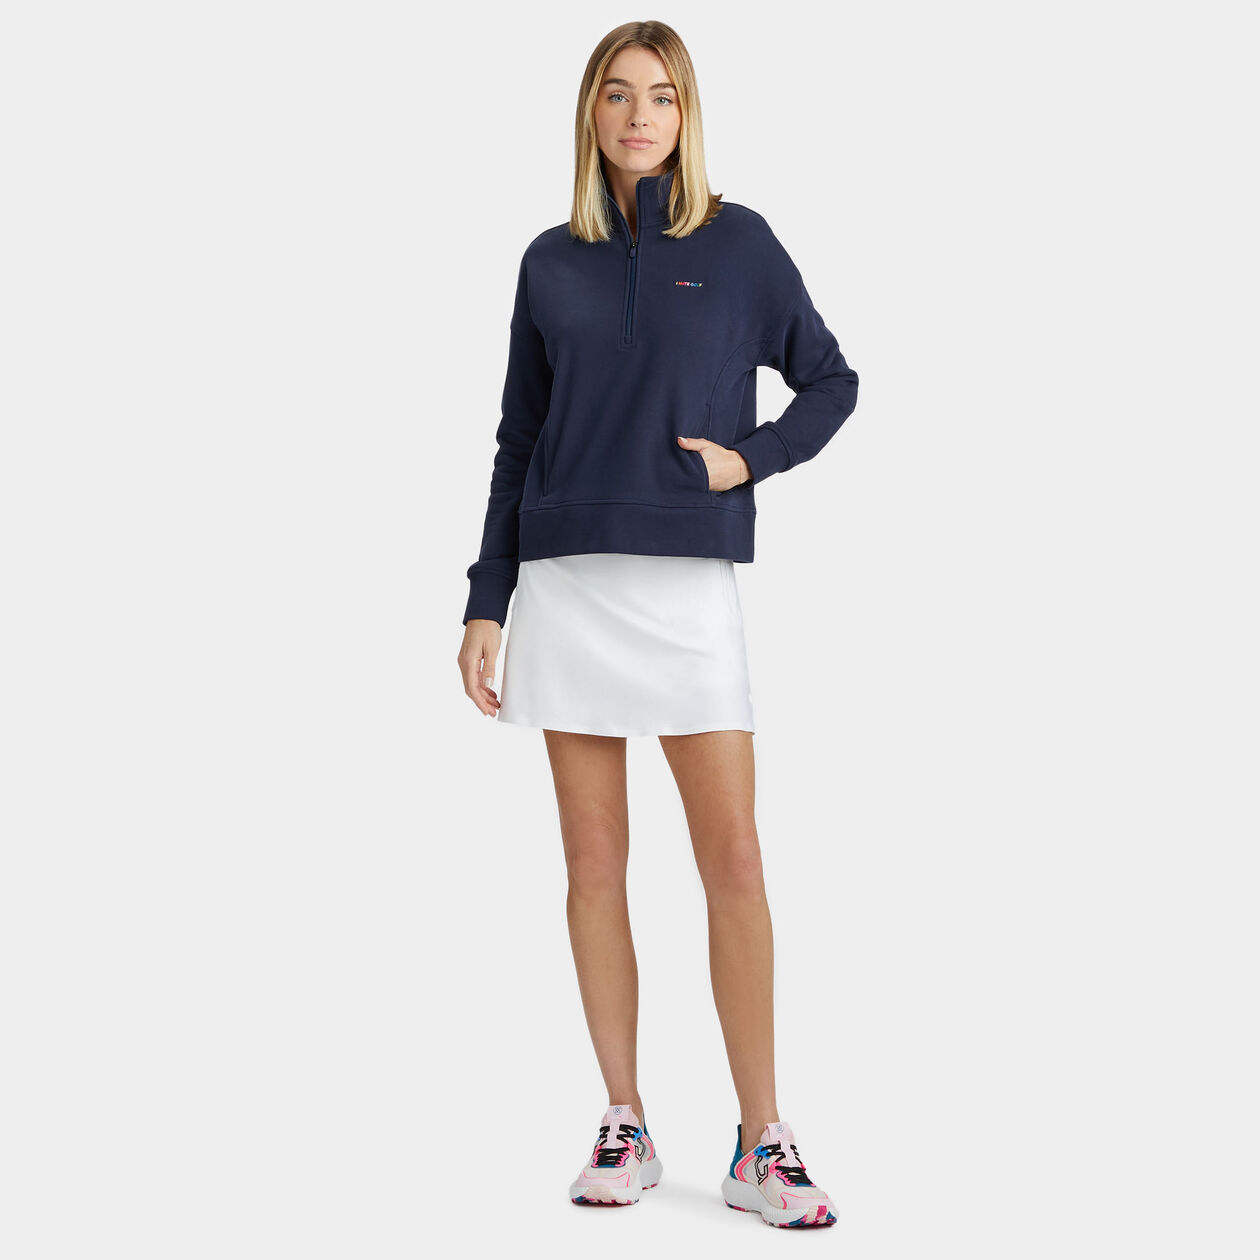 I HATE GOLF FRENCH TERRY QUARTER ZIP BOXY PULLOVER | WOMEN'S